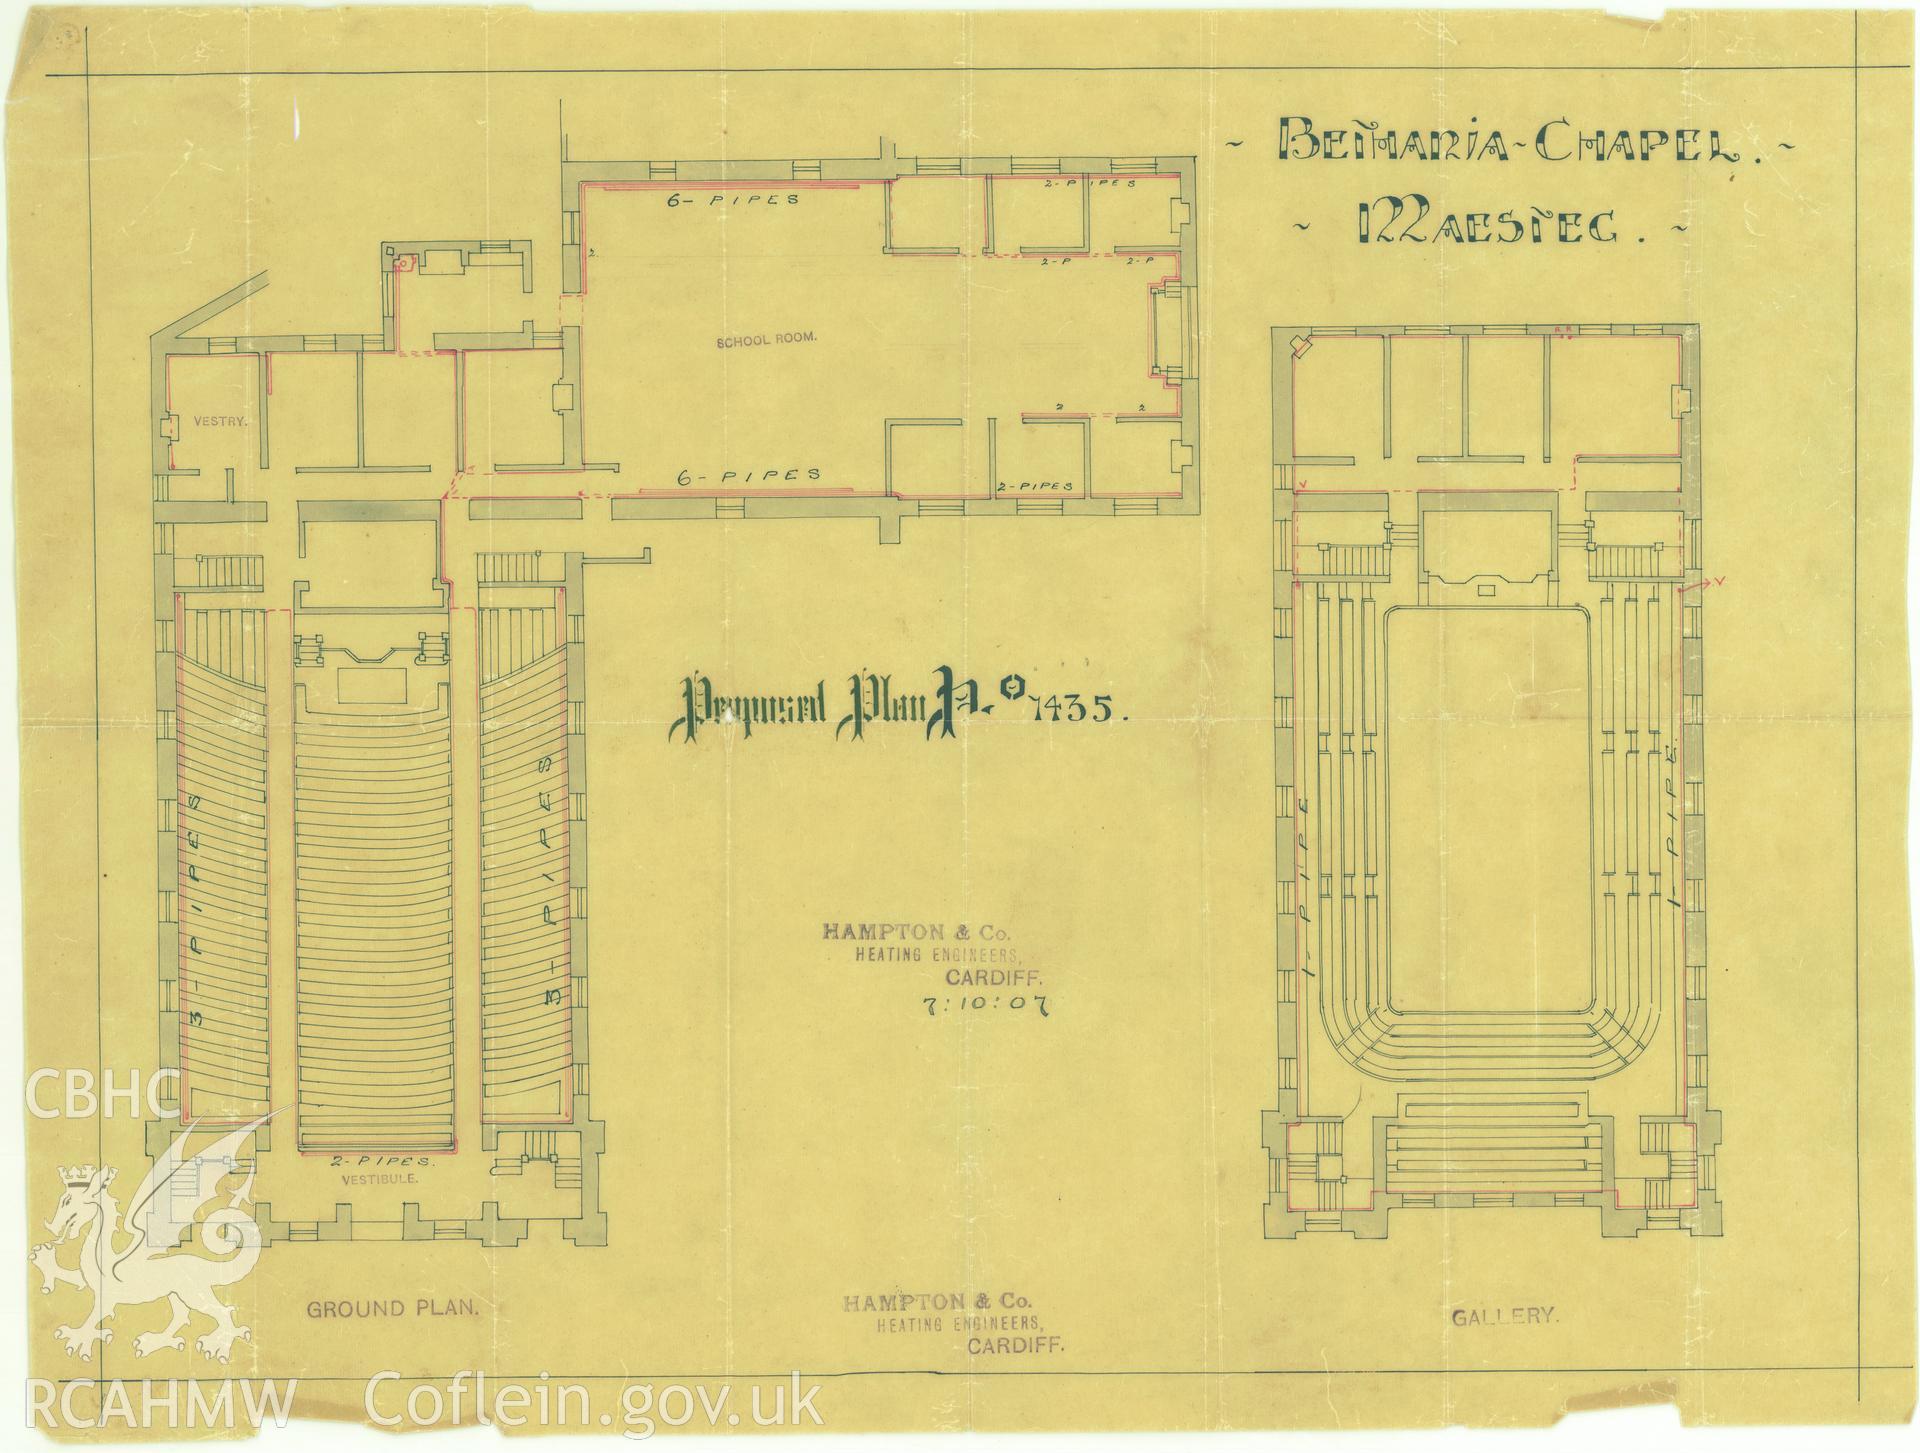 Digitized copy of a coloured pen and ink drawing by Hampton and Company, Heating Engineers of Cardiff, dated 1907, showing  the proposed heating plan at Bethania Chapel, Maesteg. One of a set of original architectural drawings of Bethania Chapel, Maesteg, loaned for copying by their owners, the Welsh Religious Buildings Trust. The original drawings are held by the Glamorgan Record Office.